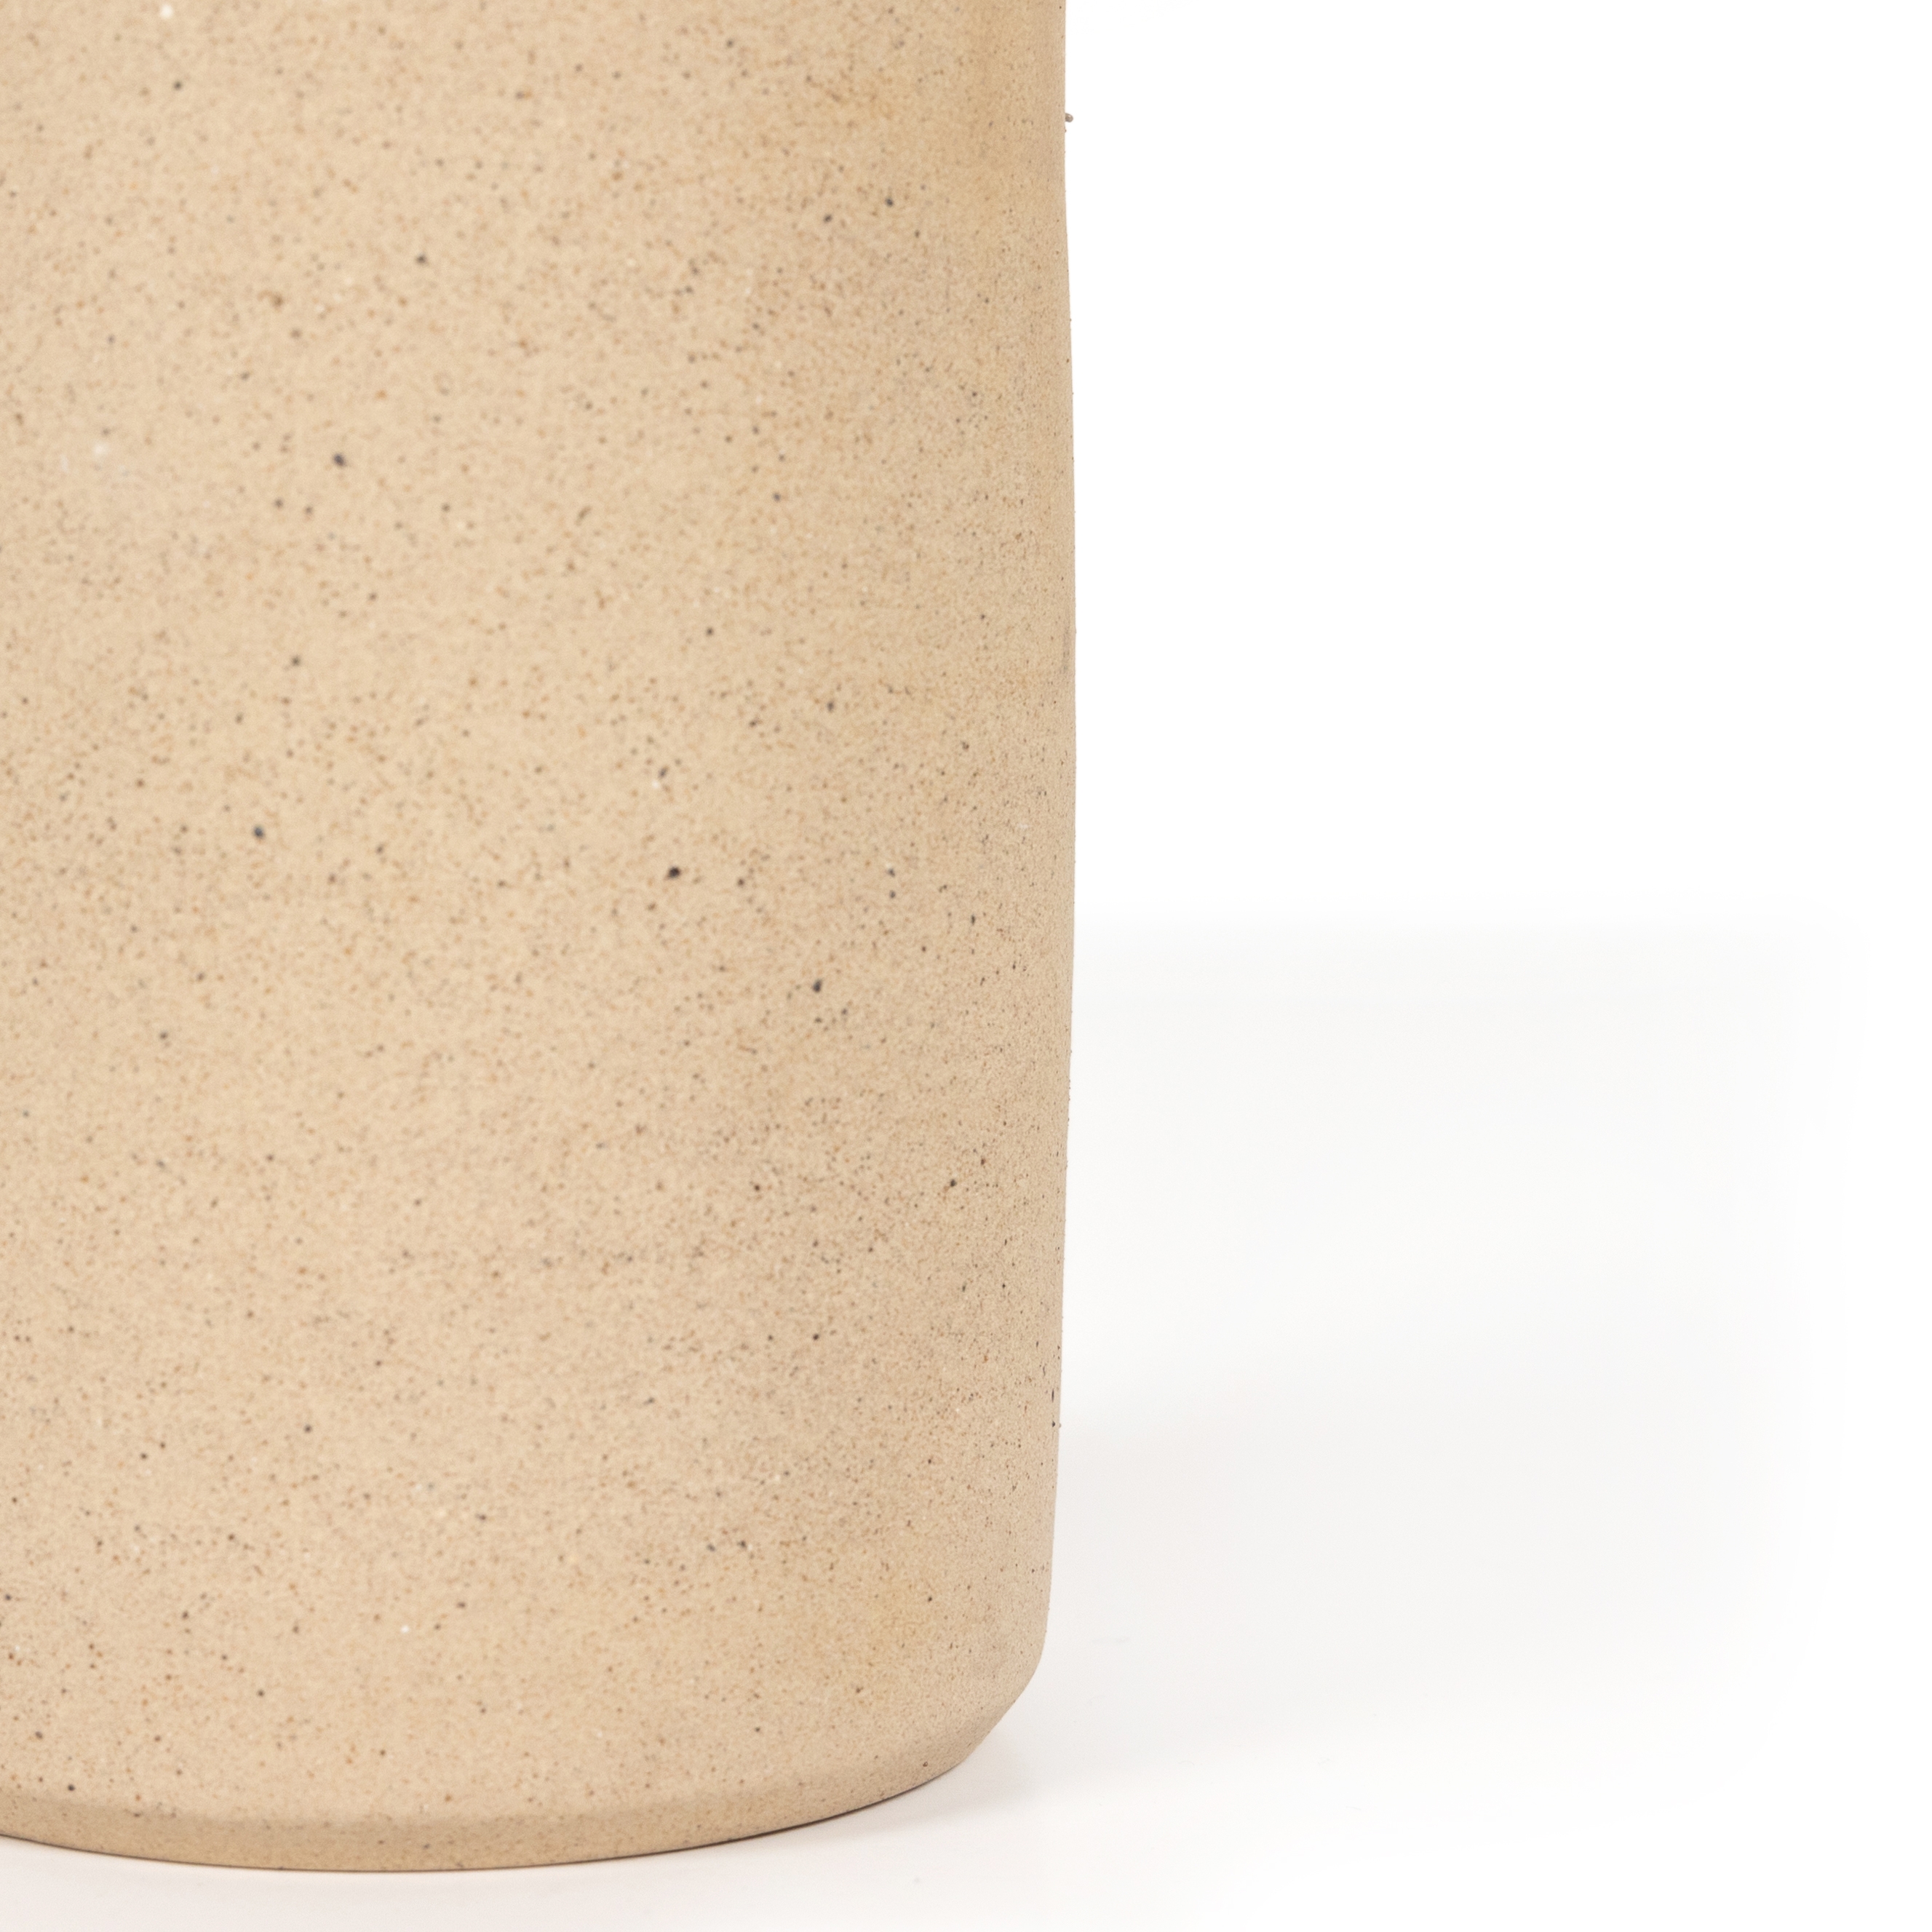 Evalia Tall Vase-Natural Speckled Clay - Image 5